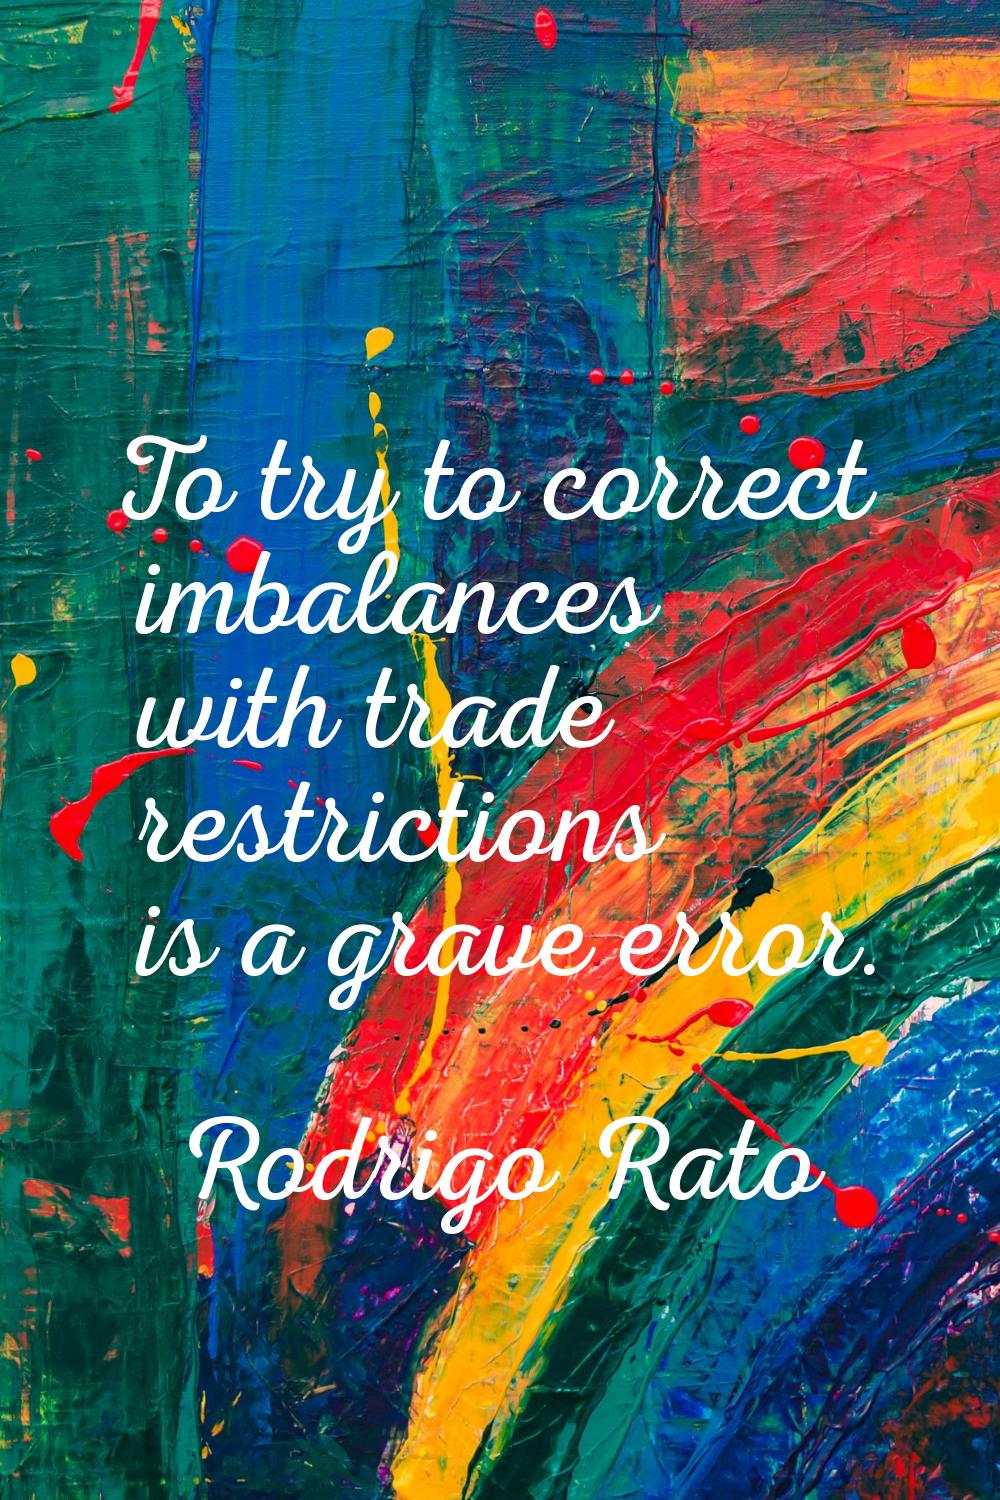 To try to correct imbalances with trade restrictions is a grave error.